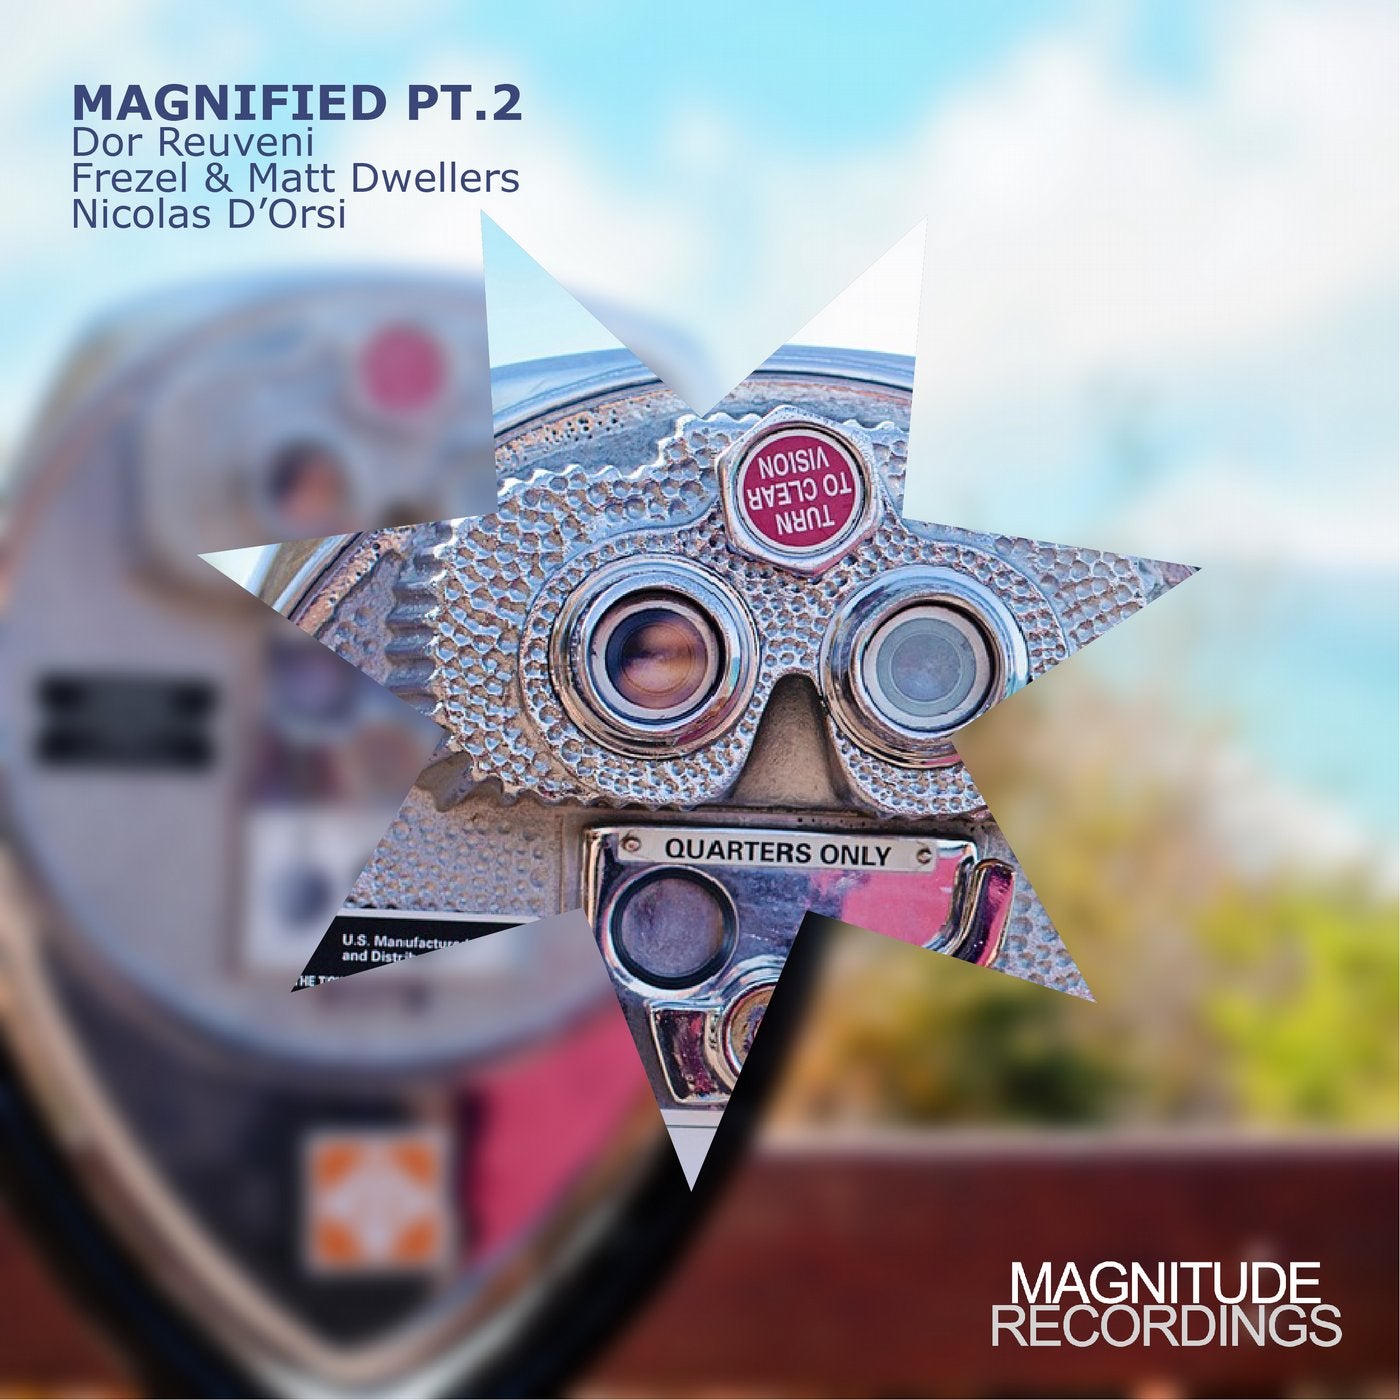 Magnified Pt. 2